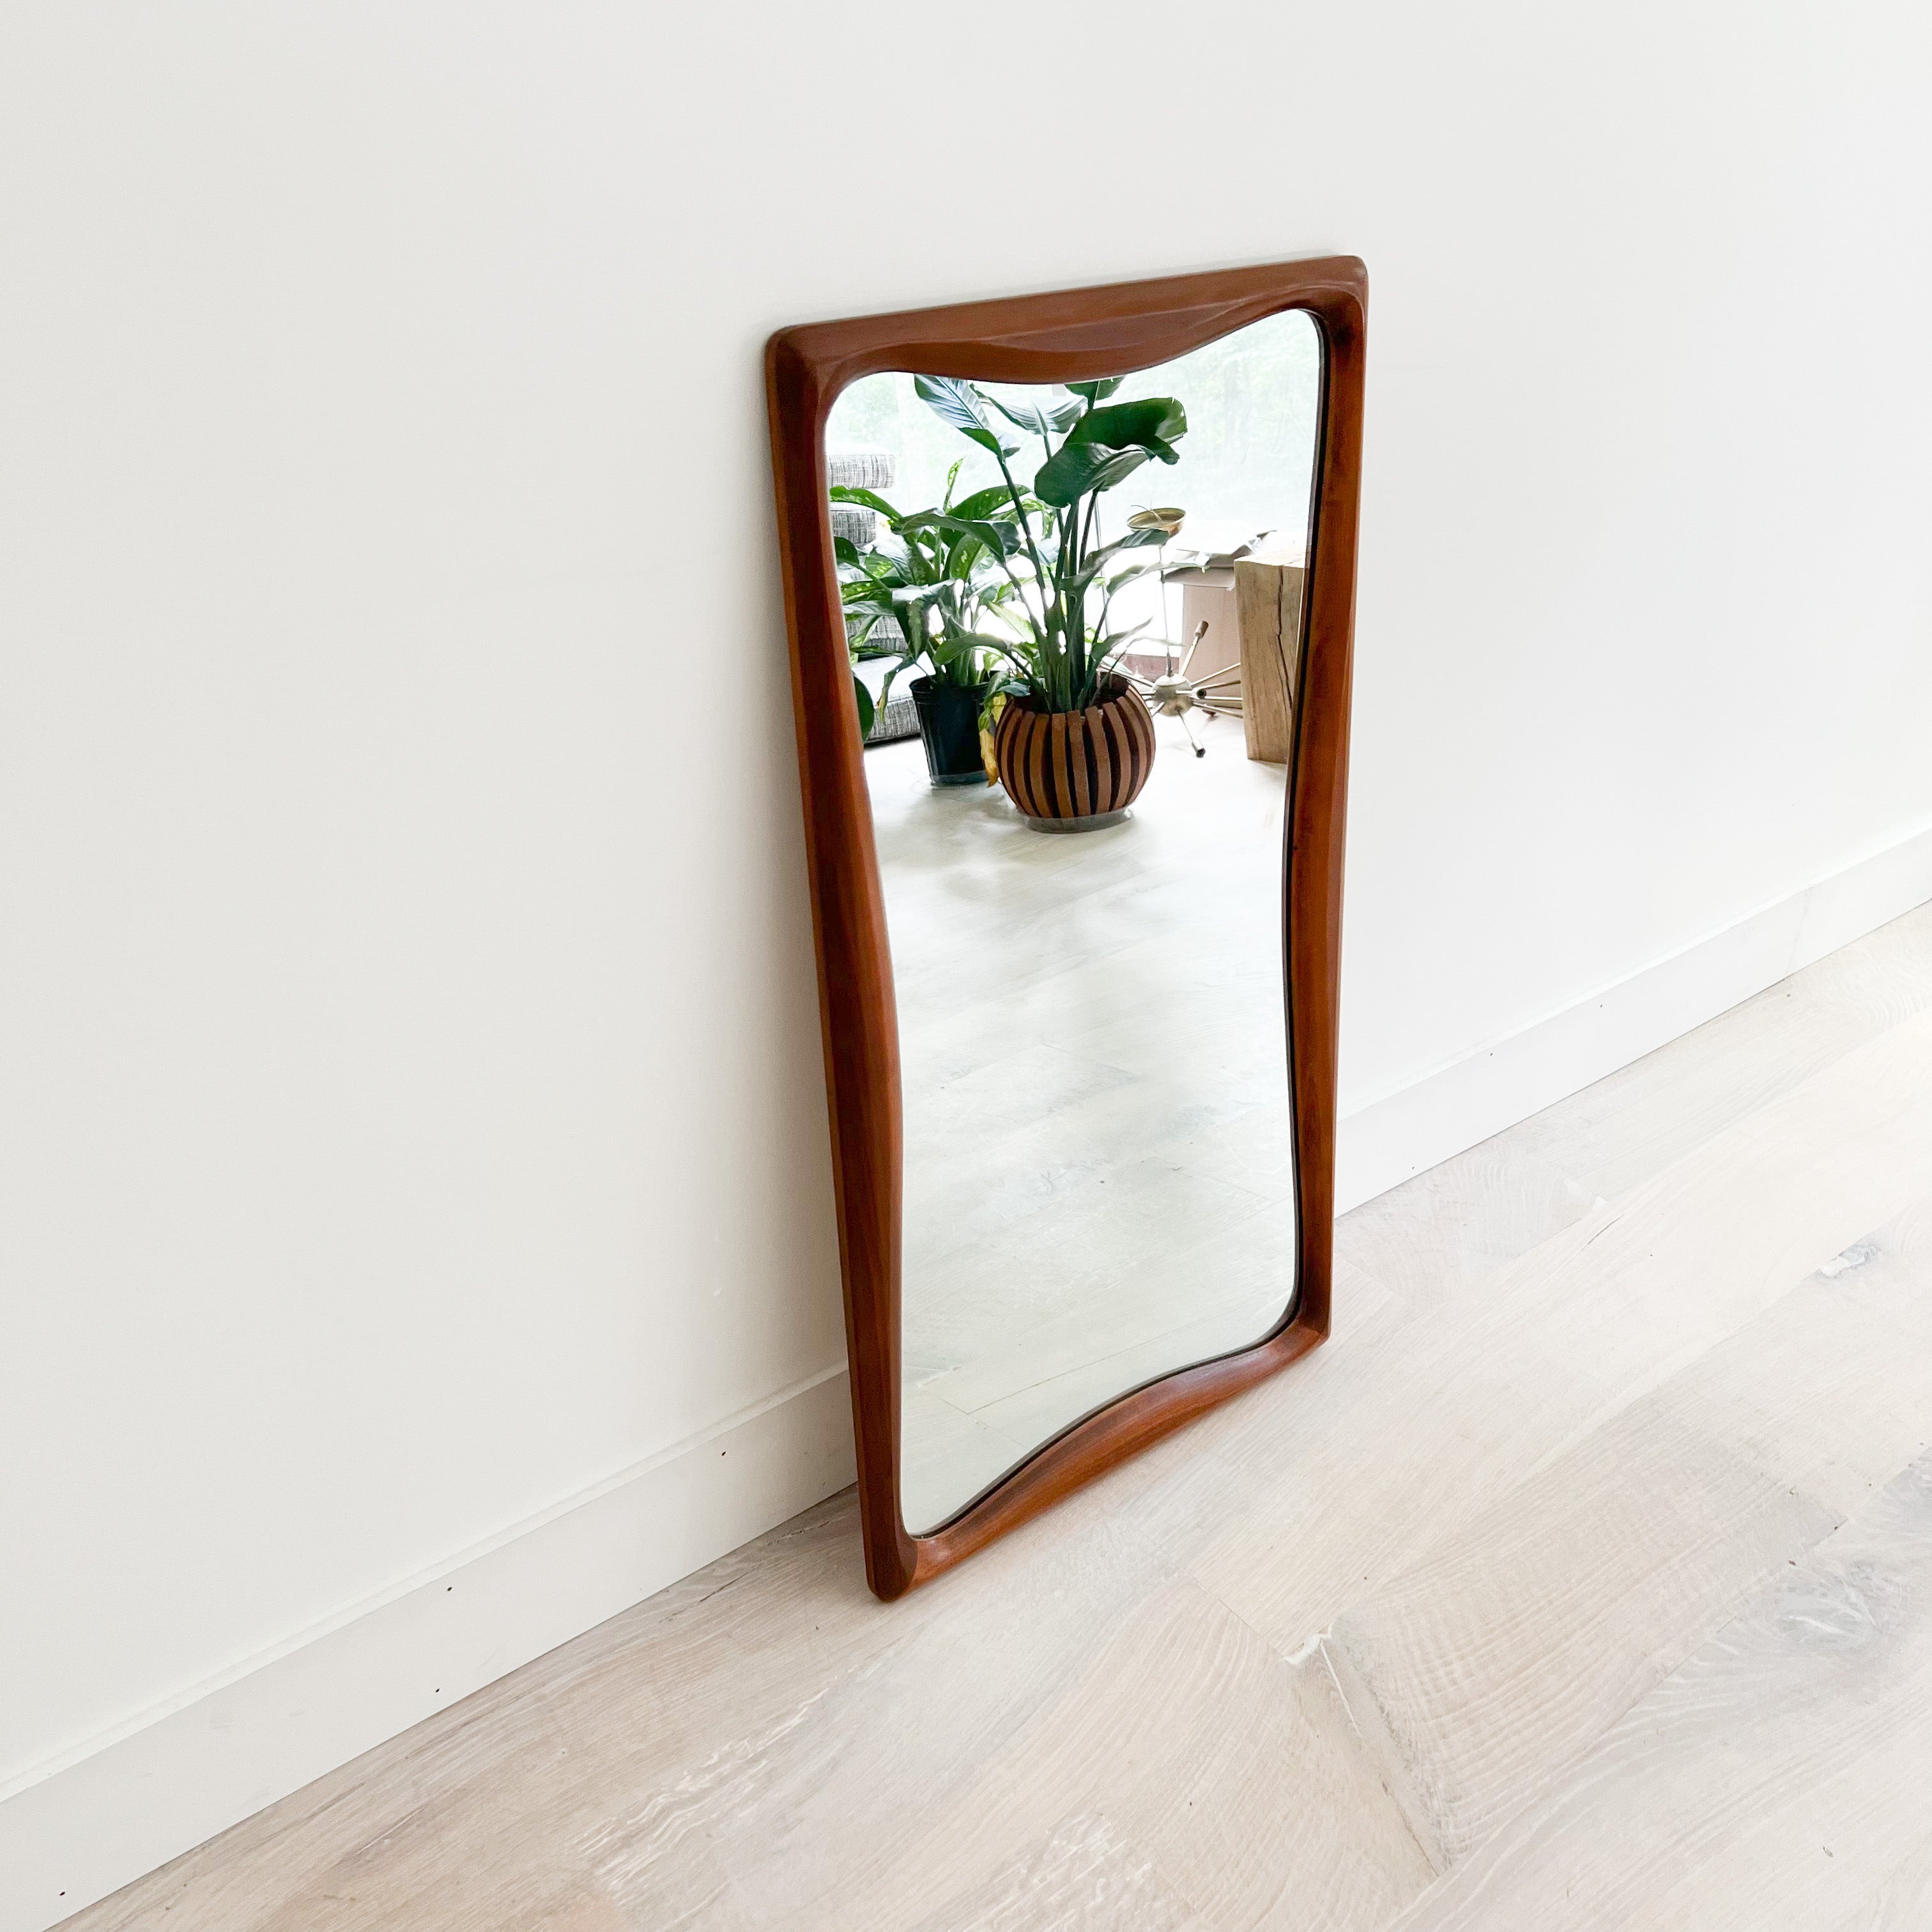 Unique Mid-Century Modern mirror with sculpted walnut sides by Bassett Furniture. Some light scuffing/scratching to the wooden frame and mirror from age appropriate wear.
 